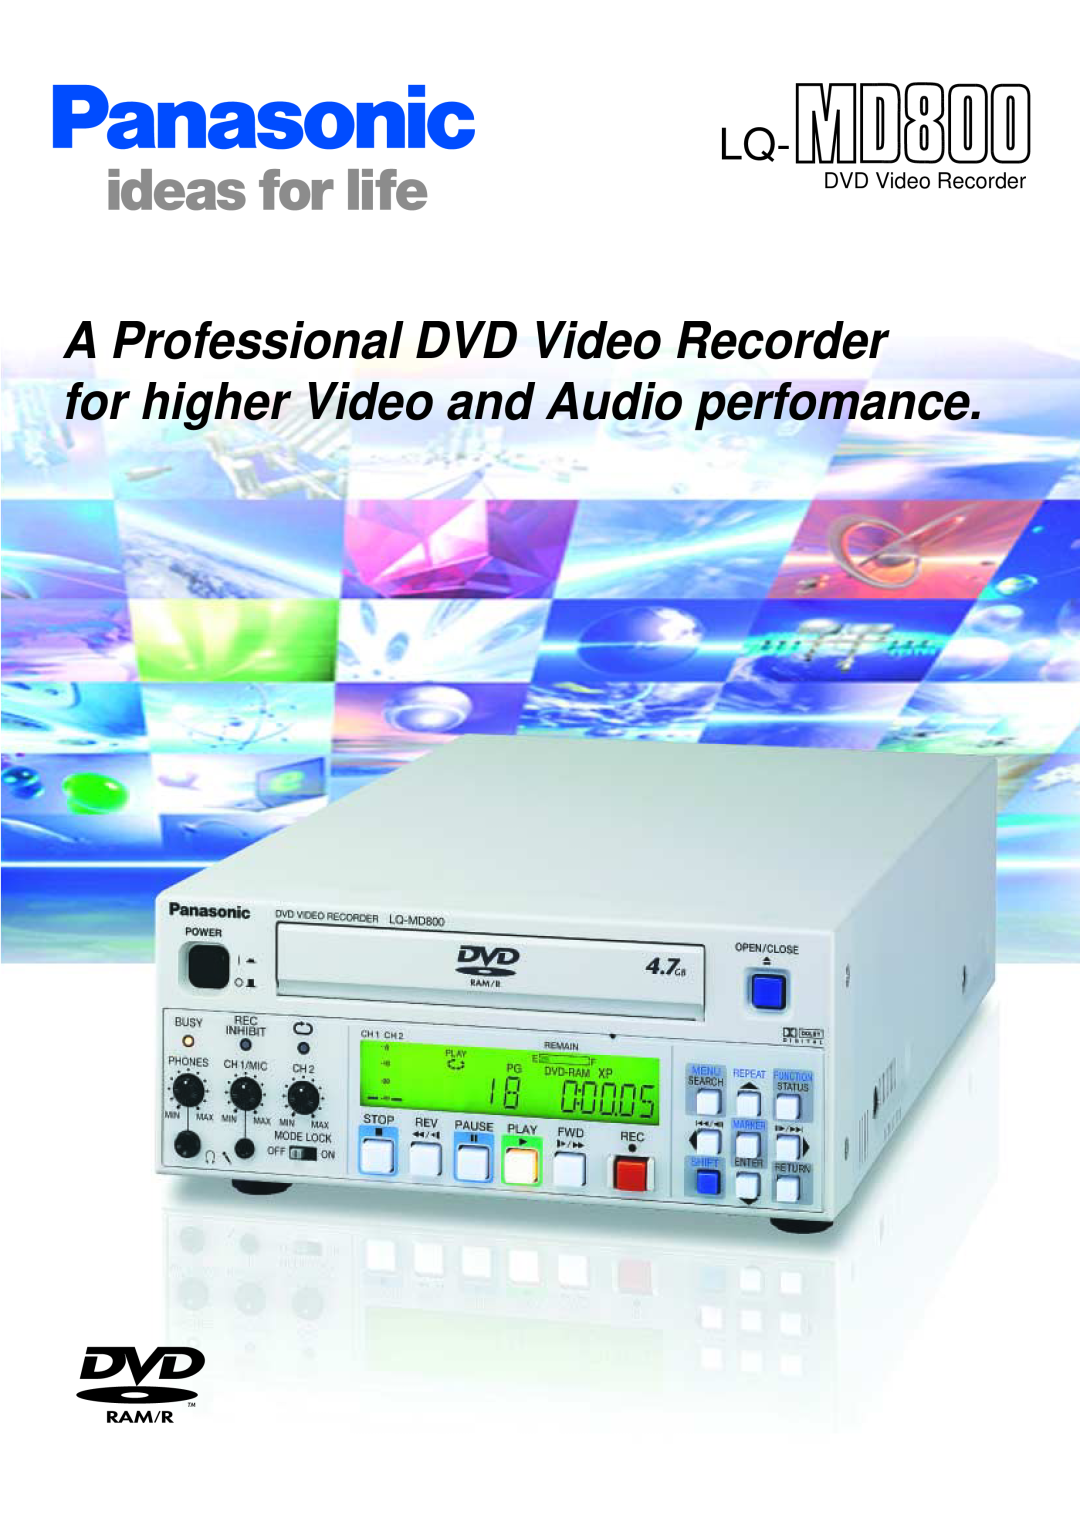 Panasonic LQ-MD800 manual A Professional DVD Video Recorder, for higher Video and Audio perfomance 